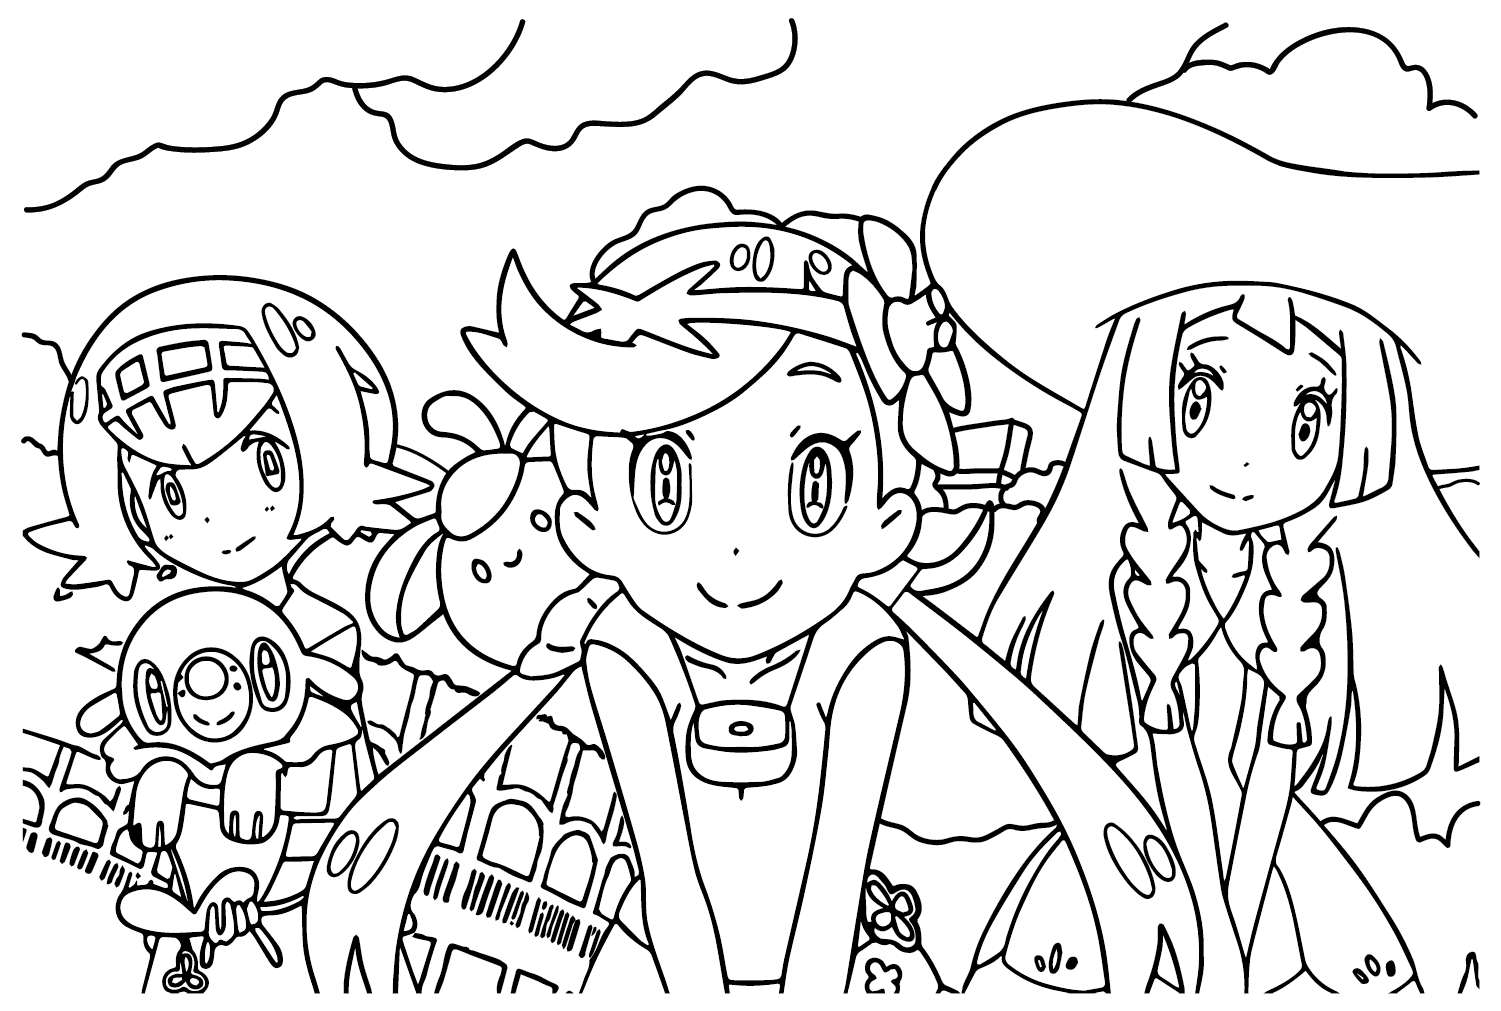 Mallow, Lillie and Lana Pokemon Coloring Page from Lillie Pokemon